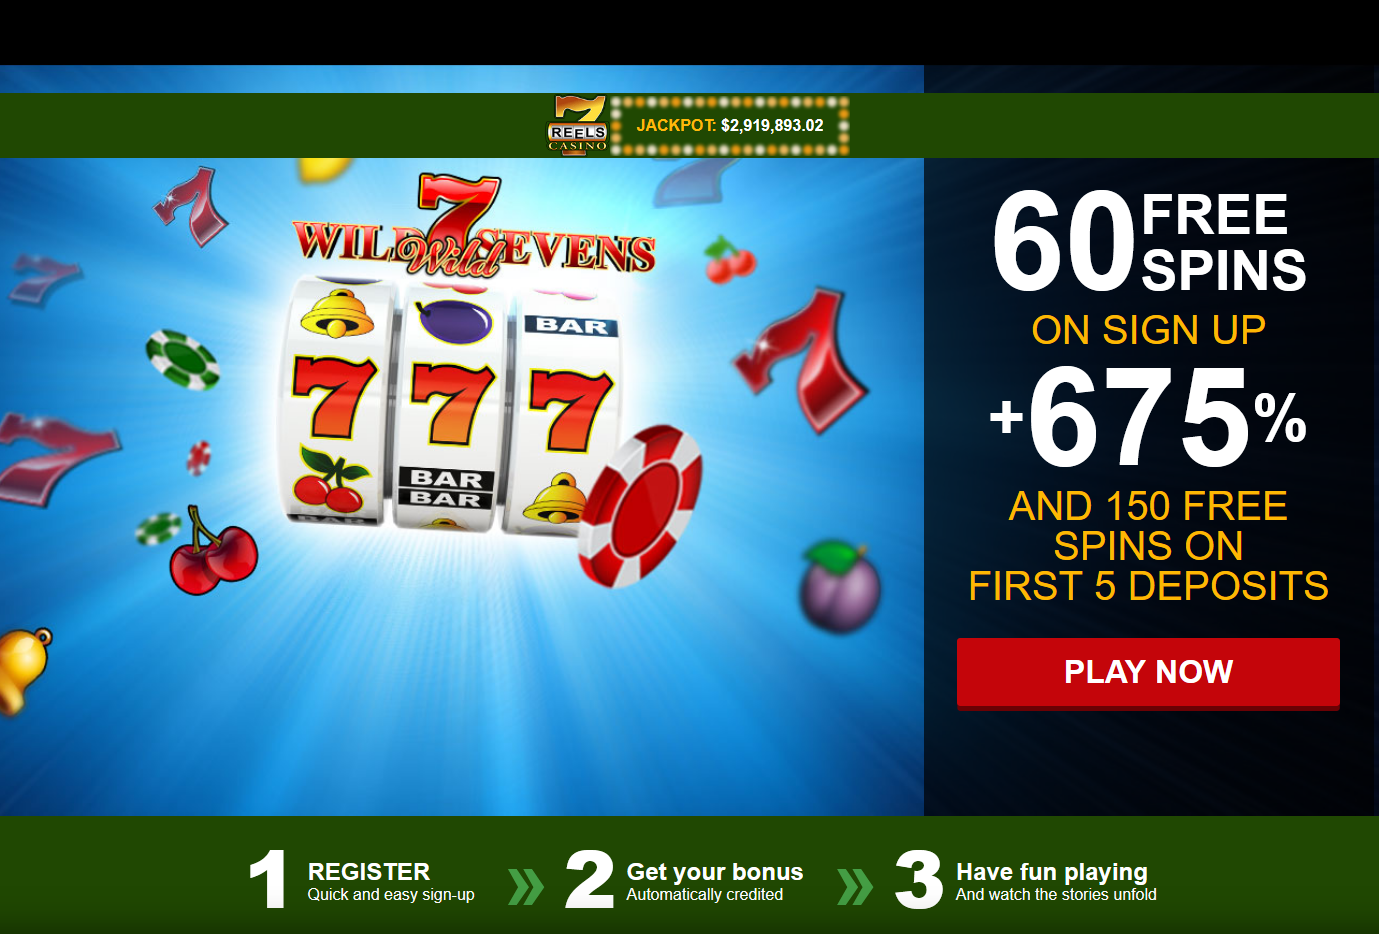 60 FREE
                                                          SPINS ON SIGN
                                                          UP + 675% AND
                                                          150 FREE SPINS
                                                          ON FIRST 5
                                                          DEPOSITS